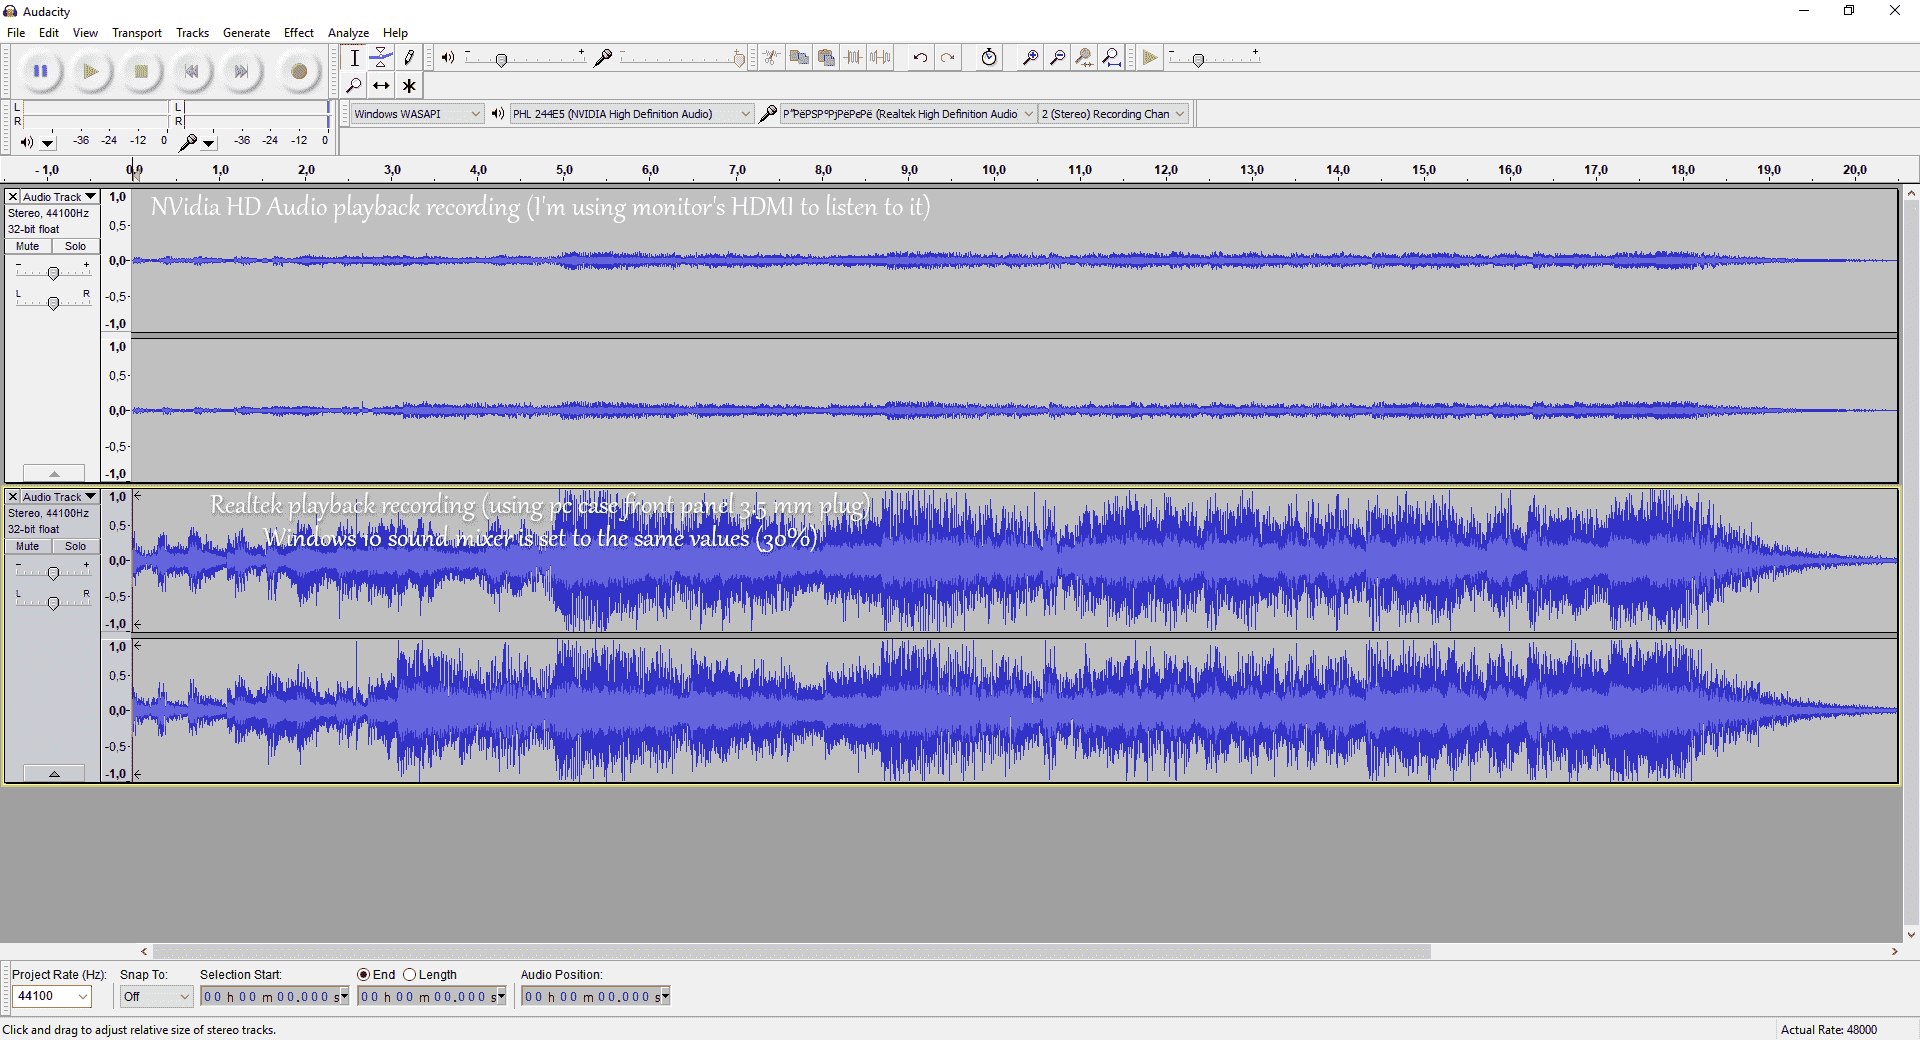 Recorded sound volume is much lower than what I can hear during recording 46dd8dfb-8526-4c87-9016-261c9bf31bbc?upload=true.png